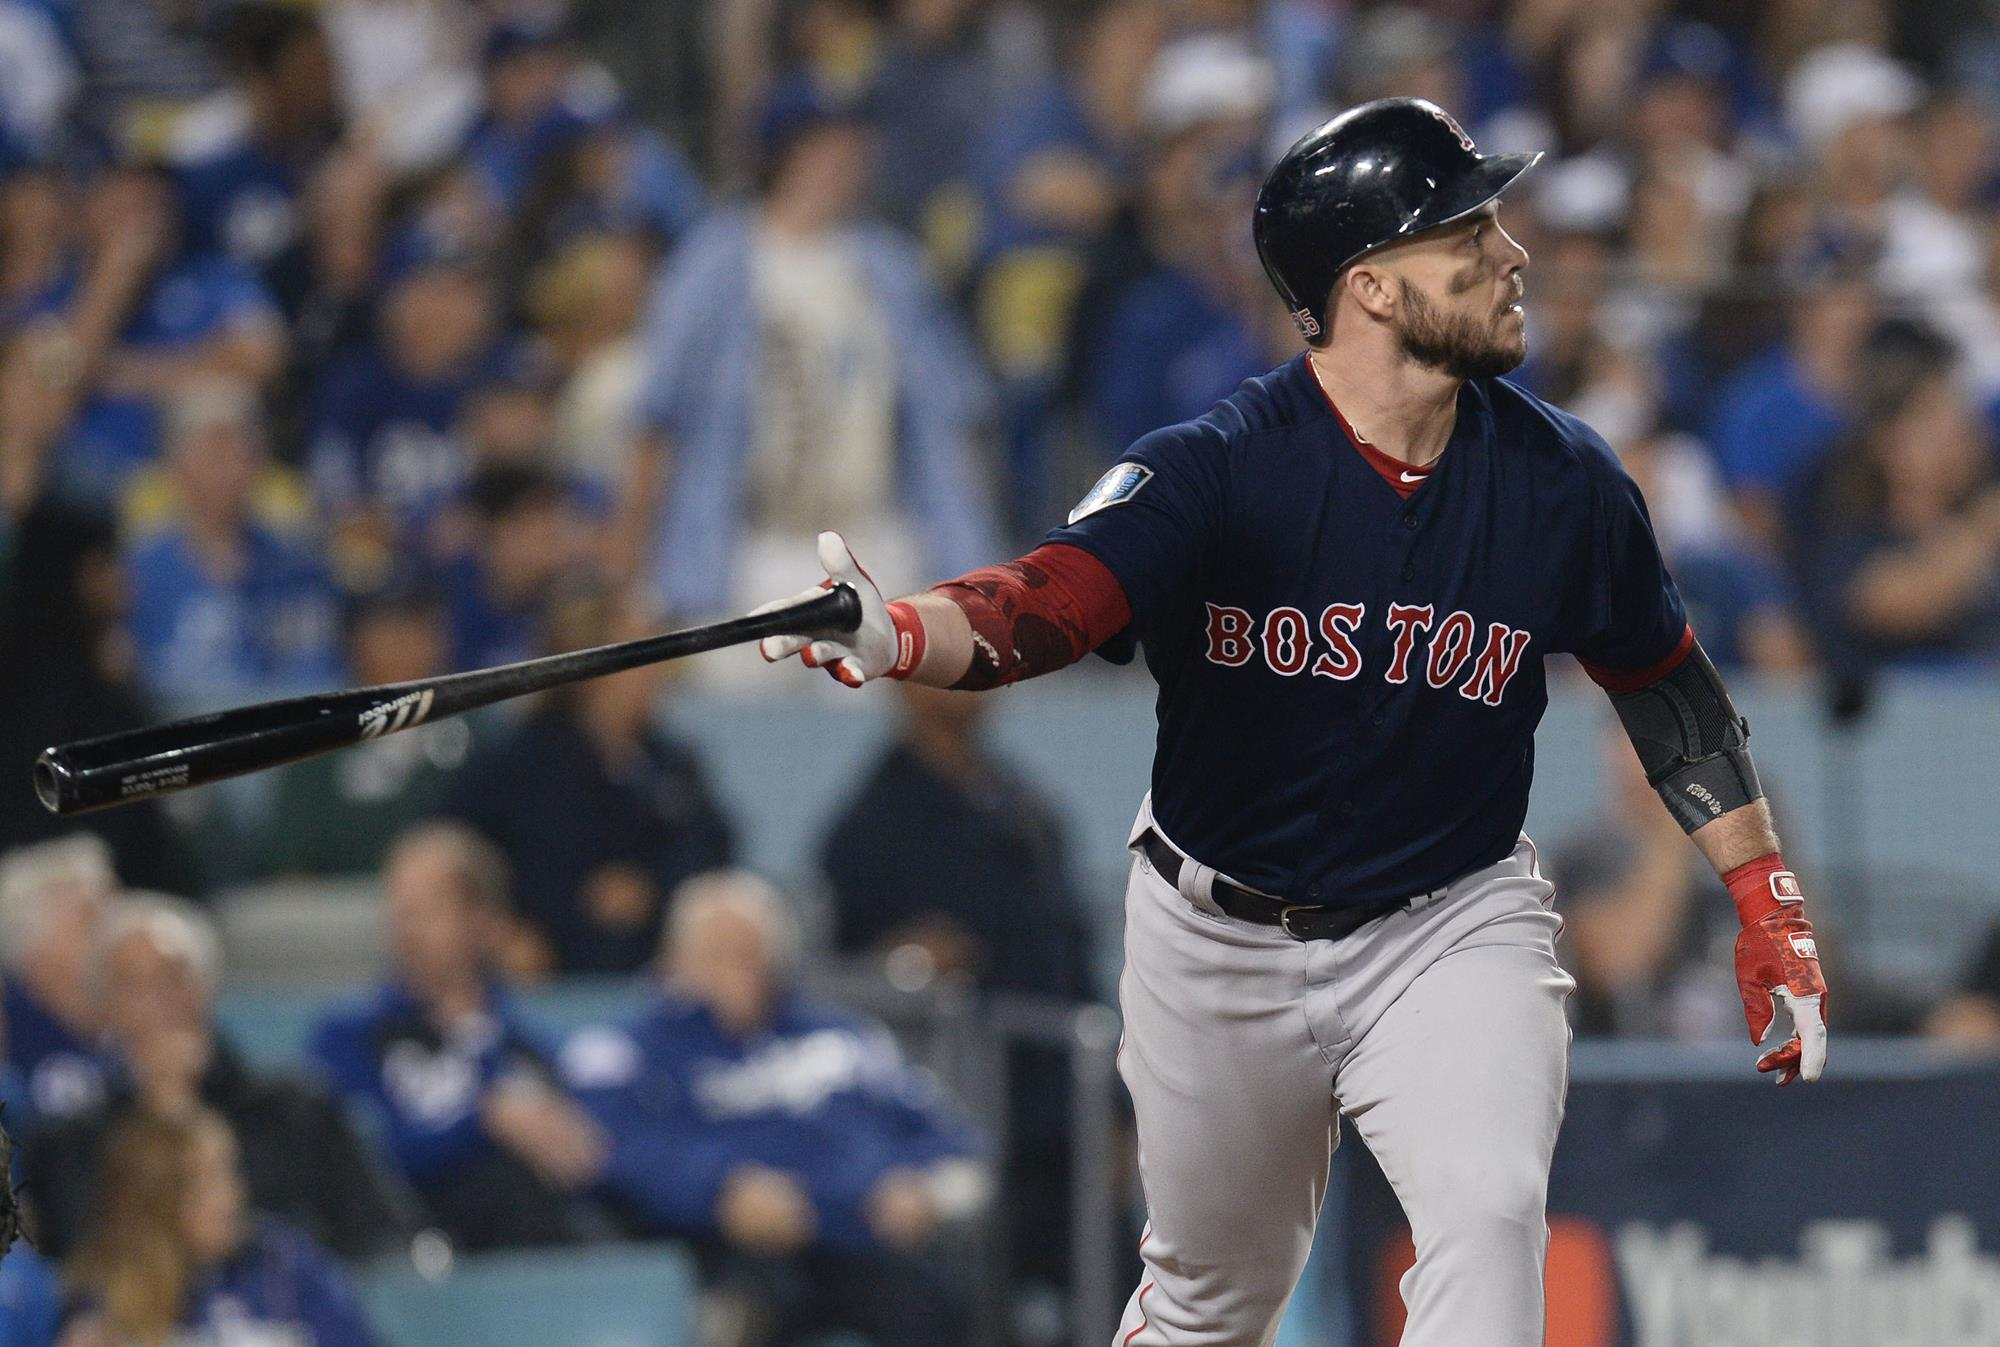 Gamecock Duo Helps Red Sox Win World Series Title; Pearce Named Series MVP